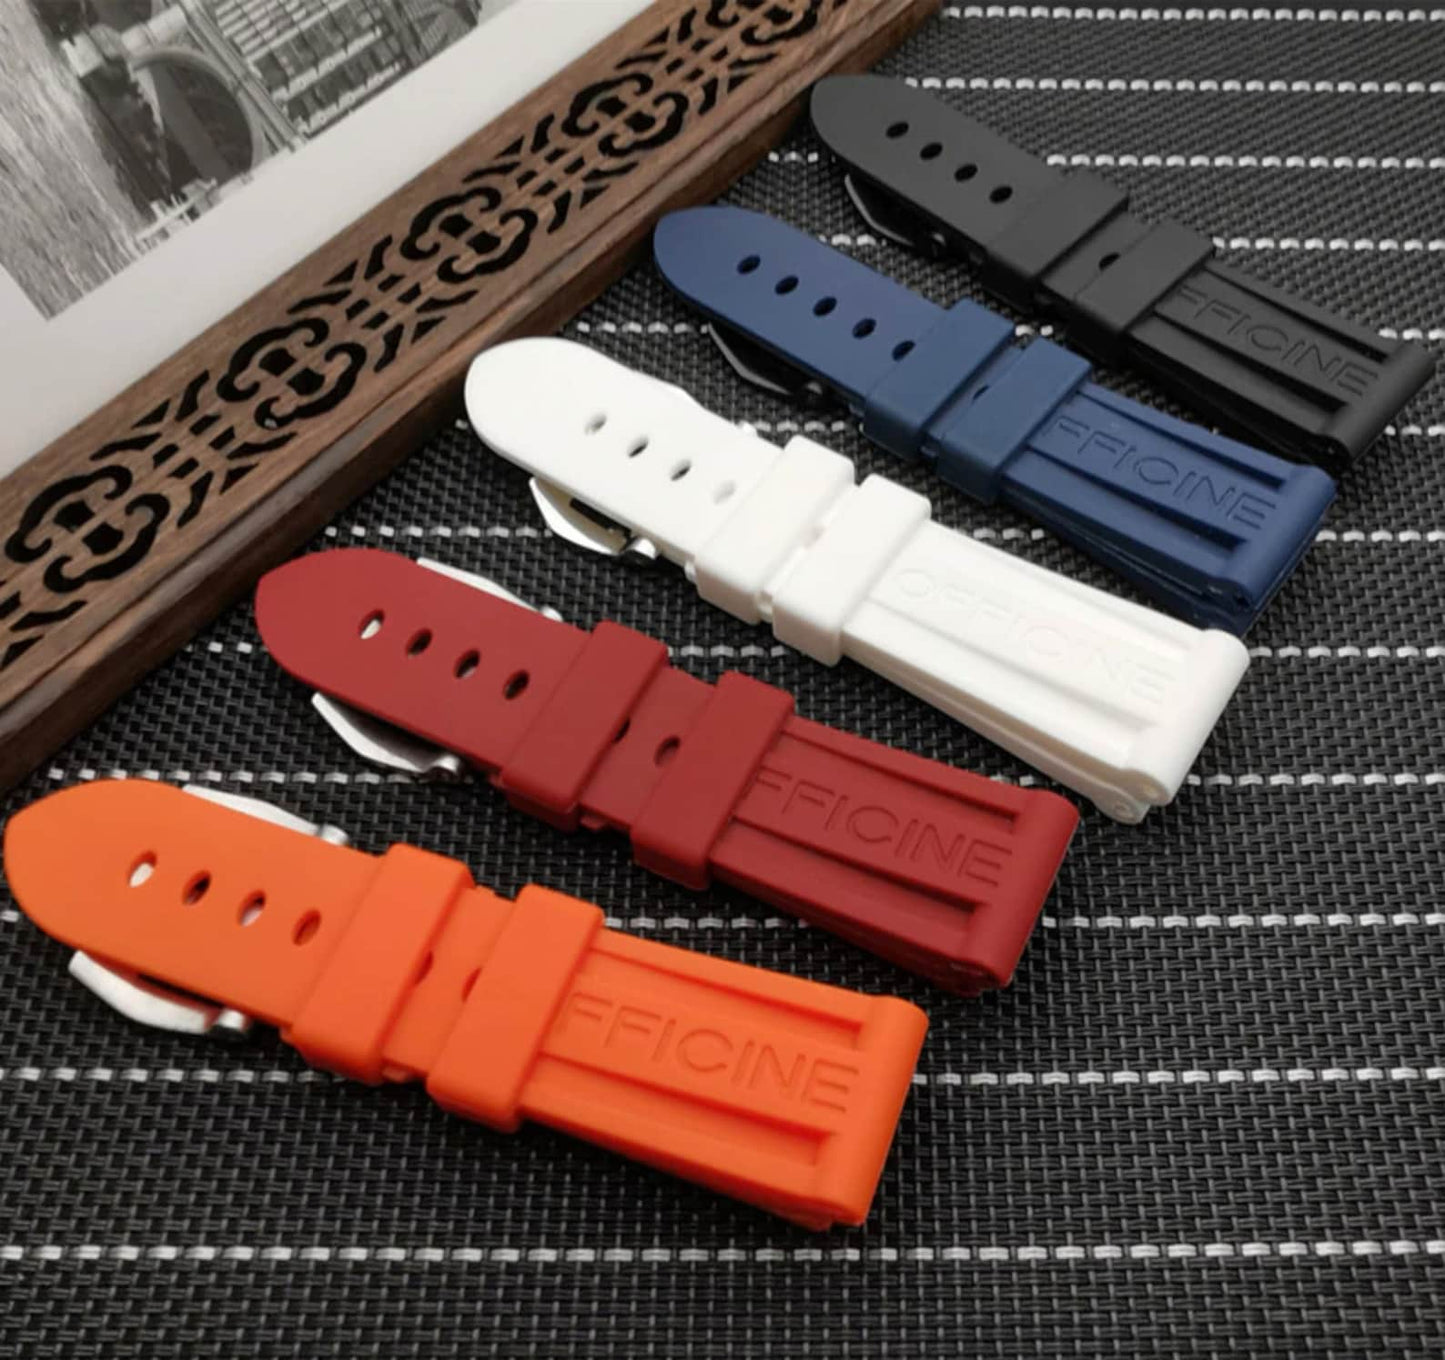 24MM Panerai Officine Rubber Watch Band Strap Bracelet with Buckle Diver Strap For 24mm Watch Replacement Band With Buckle Clasp